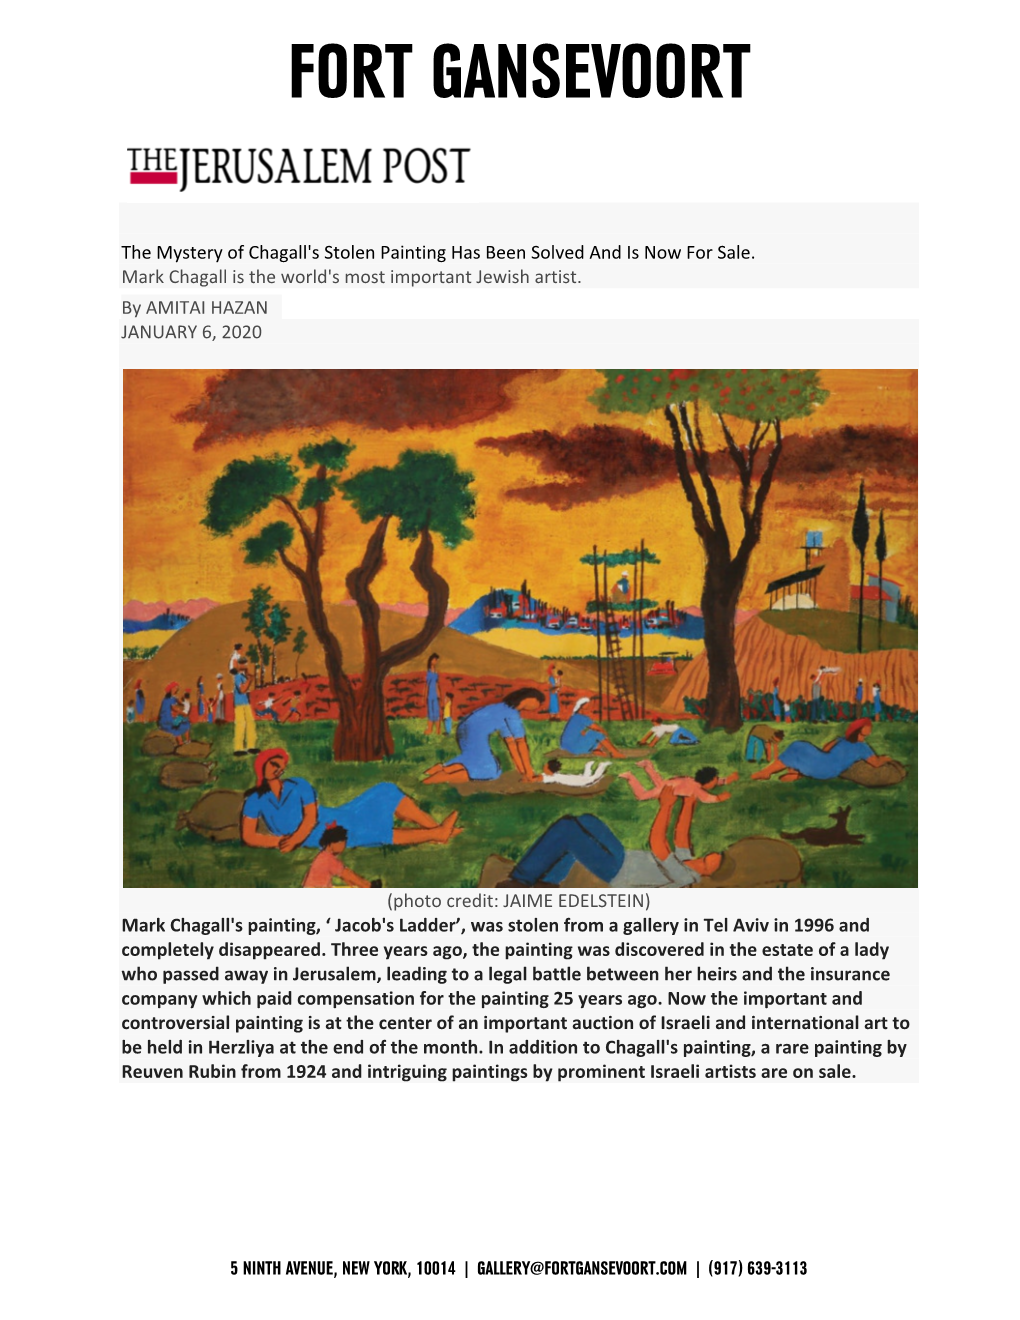 The Jerusalem Post the Mystery of Chagall's